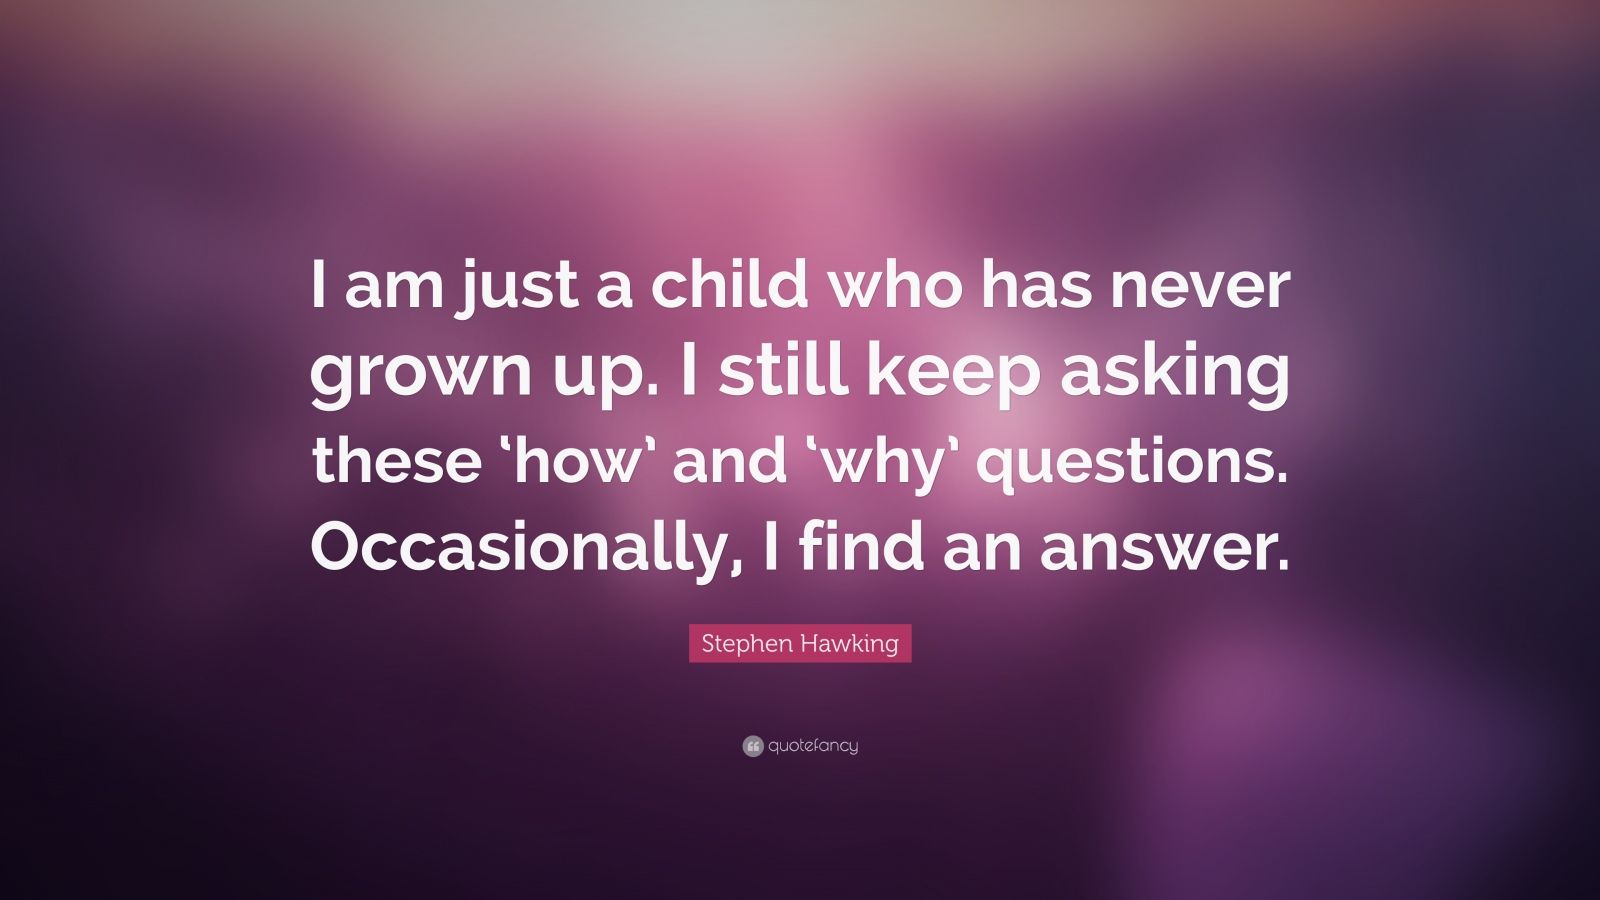 Stephen Hawking Quote: “I am just a child who has never grown up. I ...